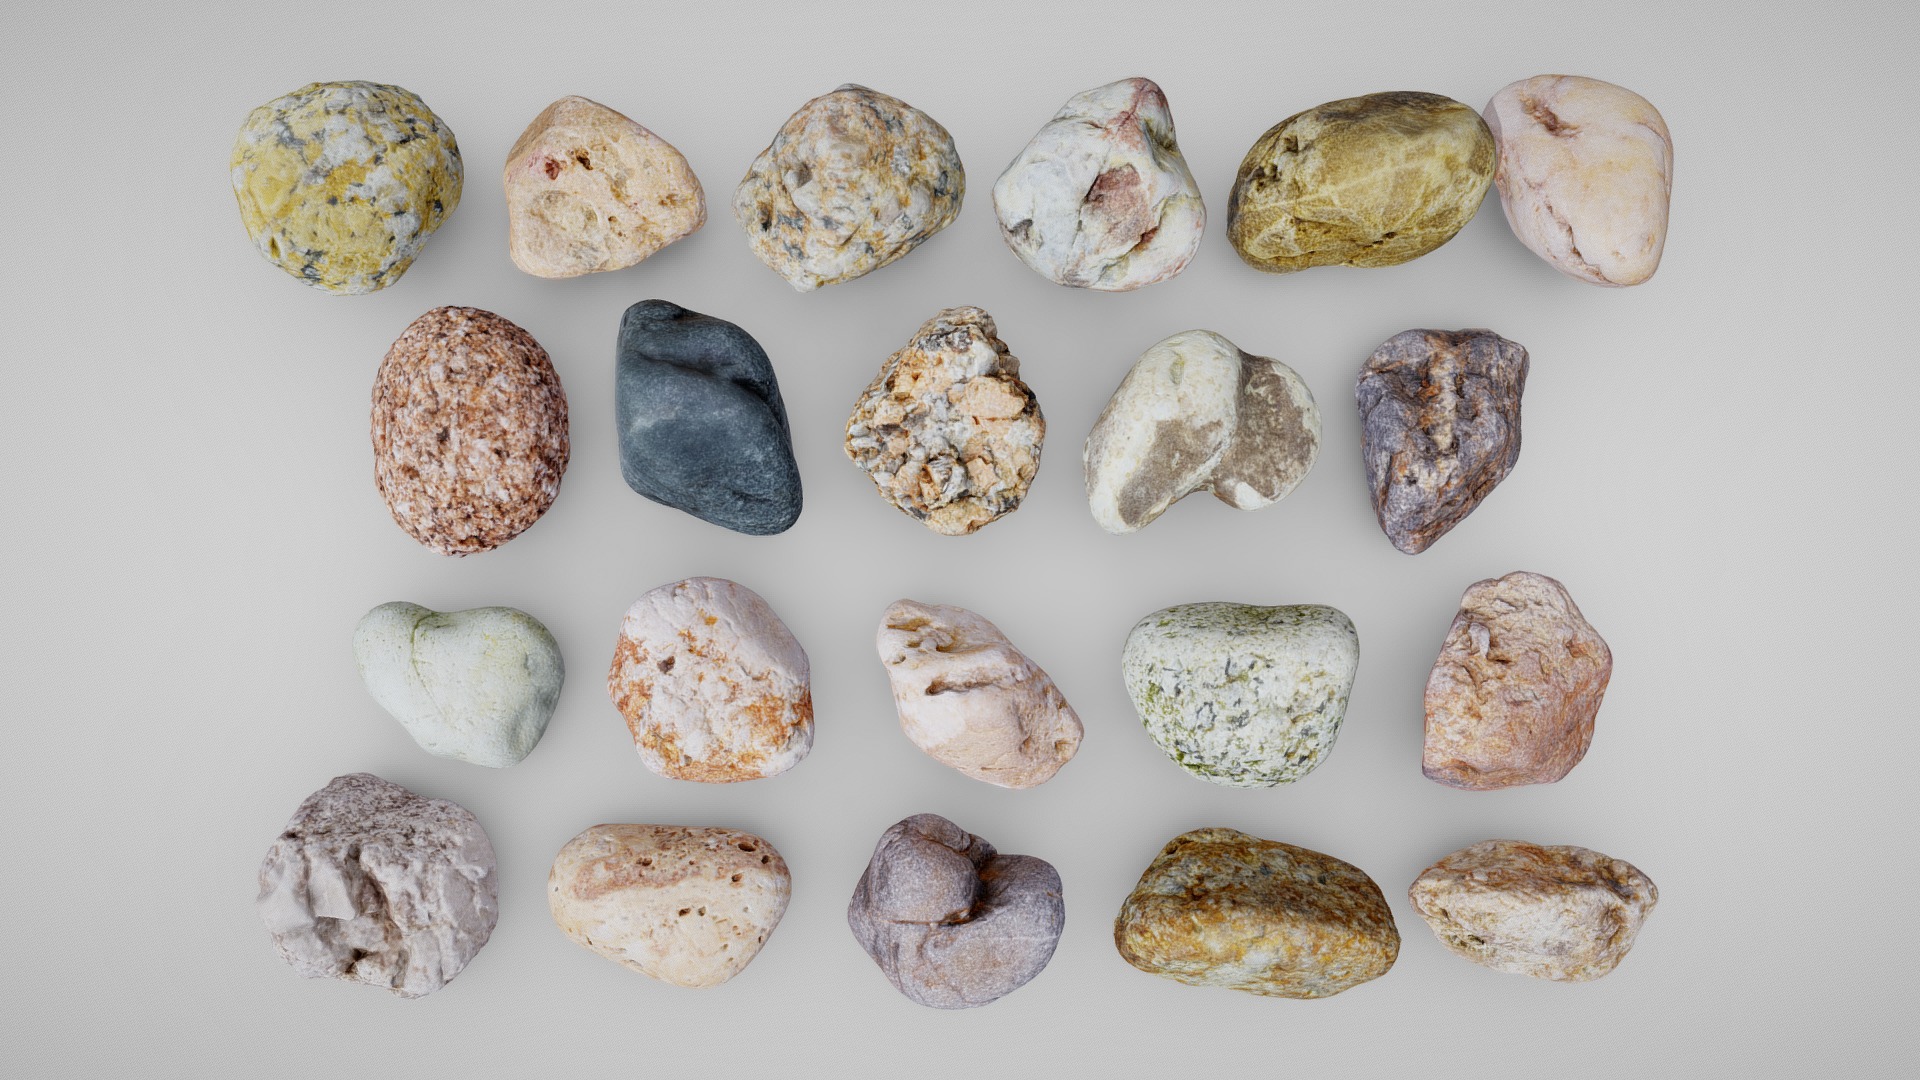 Other packs: pack 1, pack 2, pack 4

These assets were generated from scans of beach pebbles and stones I picked up on the shore between Plouguerneau and Roscoff, in France. I did not specifically select extraordinary samples, but rather tried to go for a broad diversity of colors and shapes in order to create an interesting pack.

Each prop in this bundle comes with .fbx, .obj and .dae formats, and is available in 5 different resolutions:




LOD0: 15k tris - 4096x4096 textures (albedo and normal maps)

LOD1: 5k tris - 2048x2048 (those are the ones visible here!)

LOD2: 1.5k tris - 1024x1024

LOD3: 500 tris - 512x512

LOD4: 150 tris - 256x256

If this fits your usage, you can also simply download the full collection of 84 rocks for free in the lowest resolution here :D

Enjoy ! - Rocks - Pack 3 - Buy Royalty Free 3D model by Loïc Norgeot (@norgeotloic) 3d model